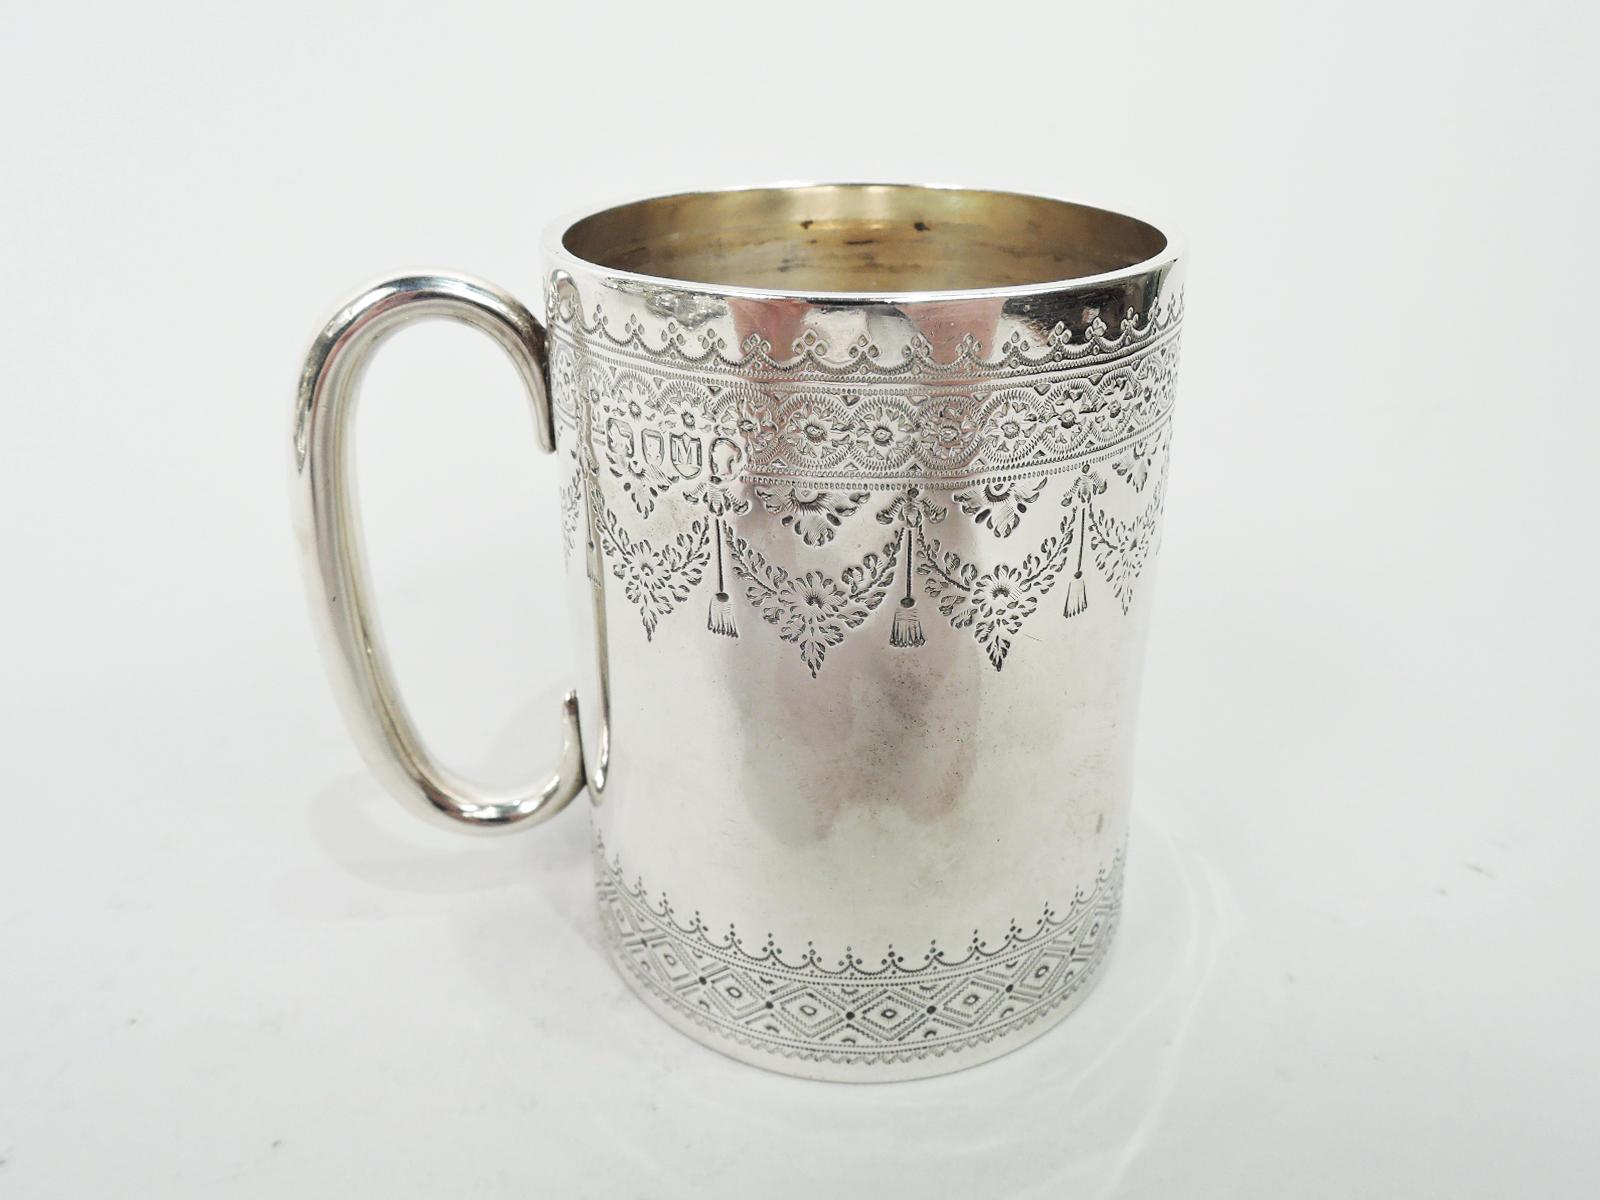 Victorian sterling silver baby cup. Made by John Aldwinckle & Thomas Slater in London in 1887. Straight and gently upward tapering sides and c-scroll handle. Ornamental borders engraved at top and bottom including ribbon-tied garlands. Festive and